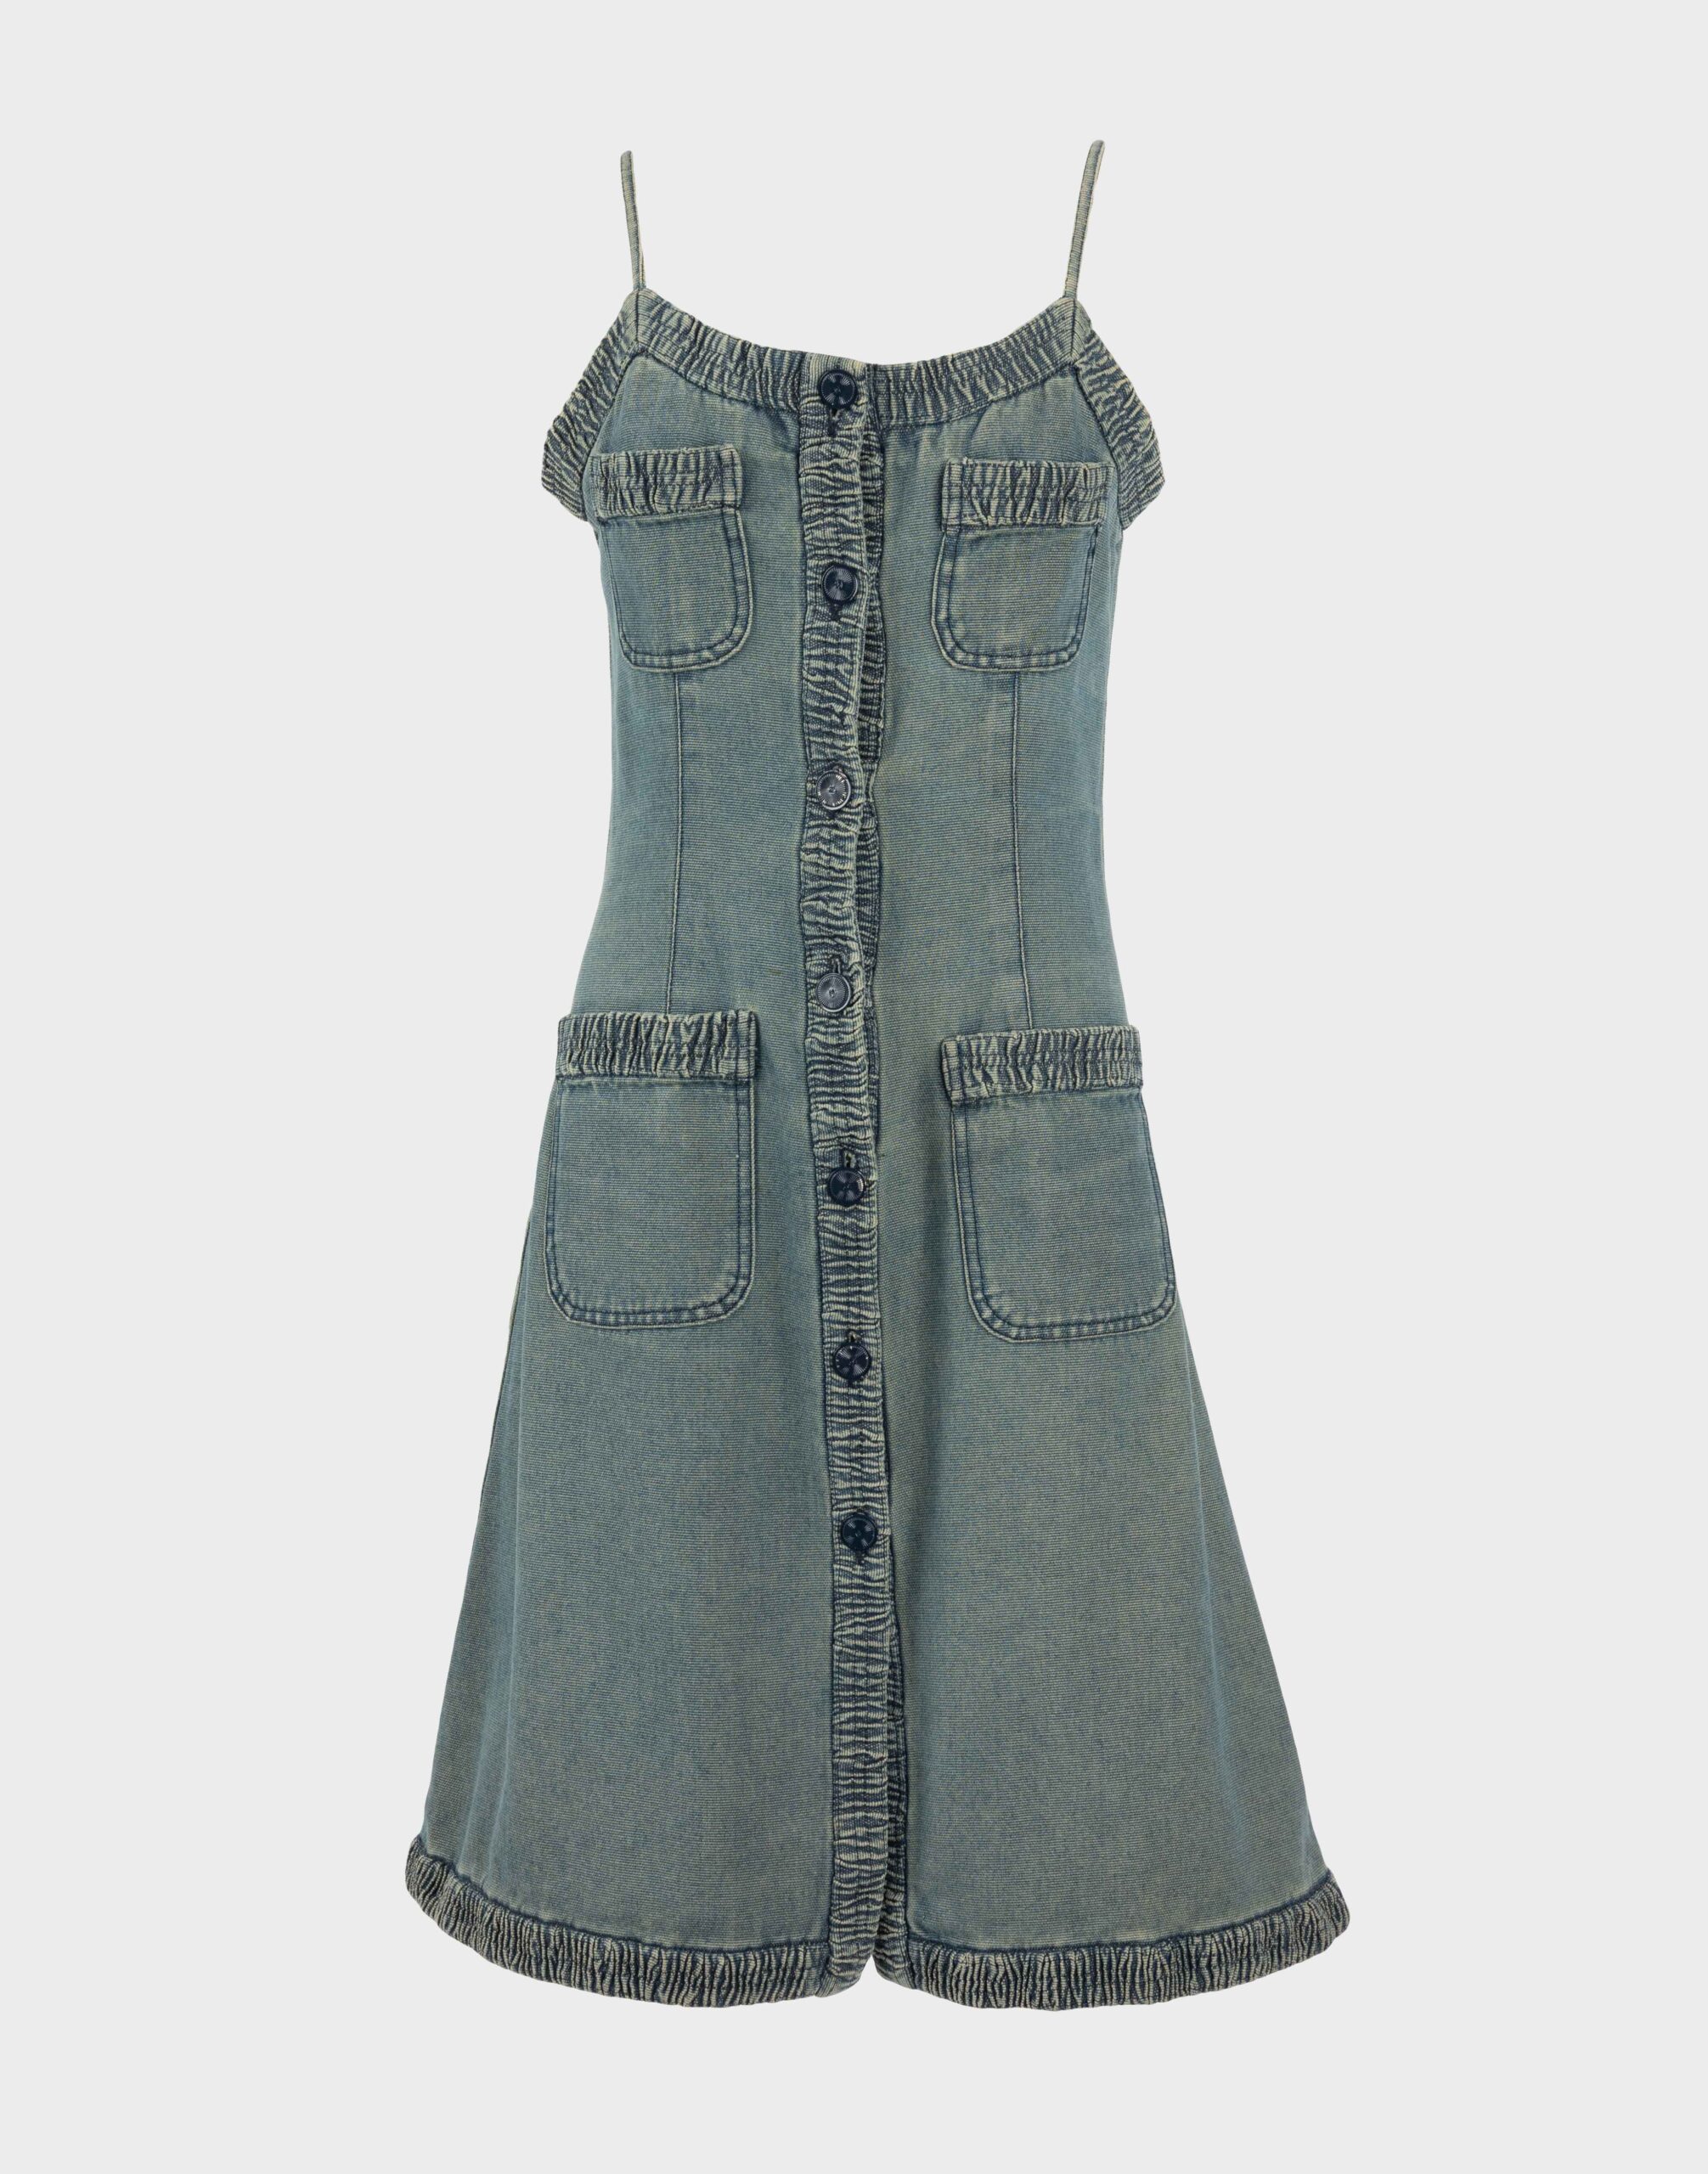 women's summer cotton dress with denim effect in green, thin shoulder straps, front fastening with black buttons and four front pockets